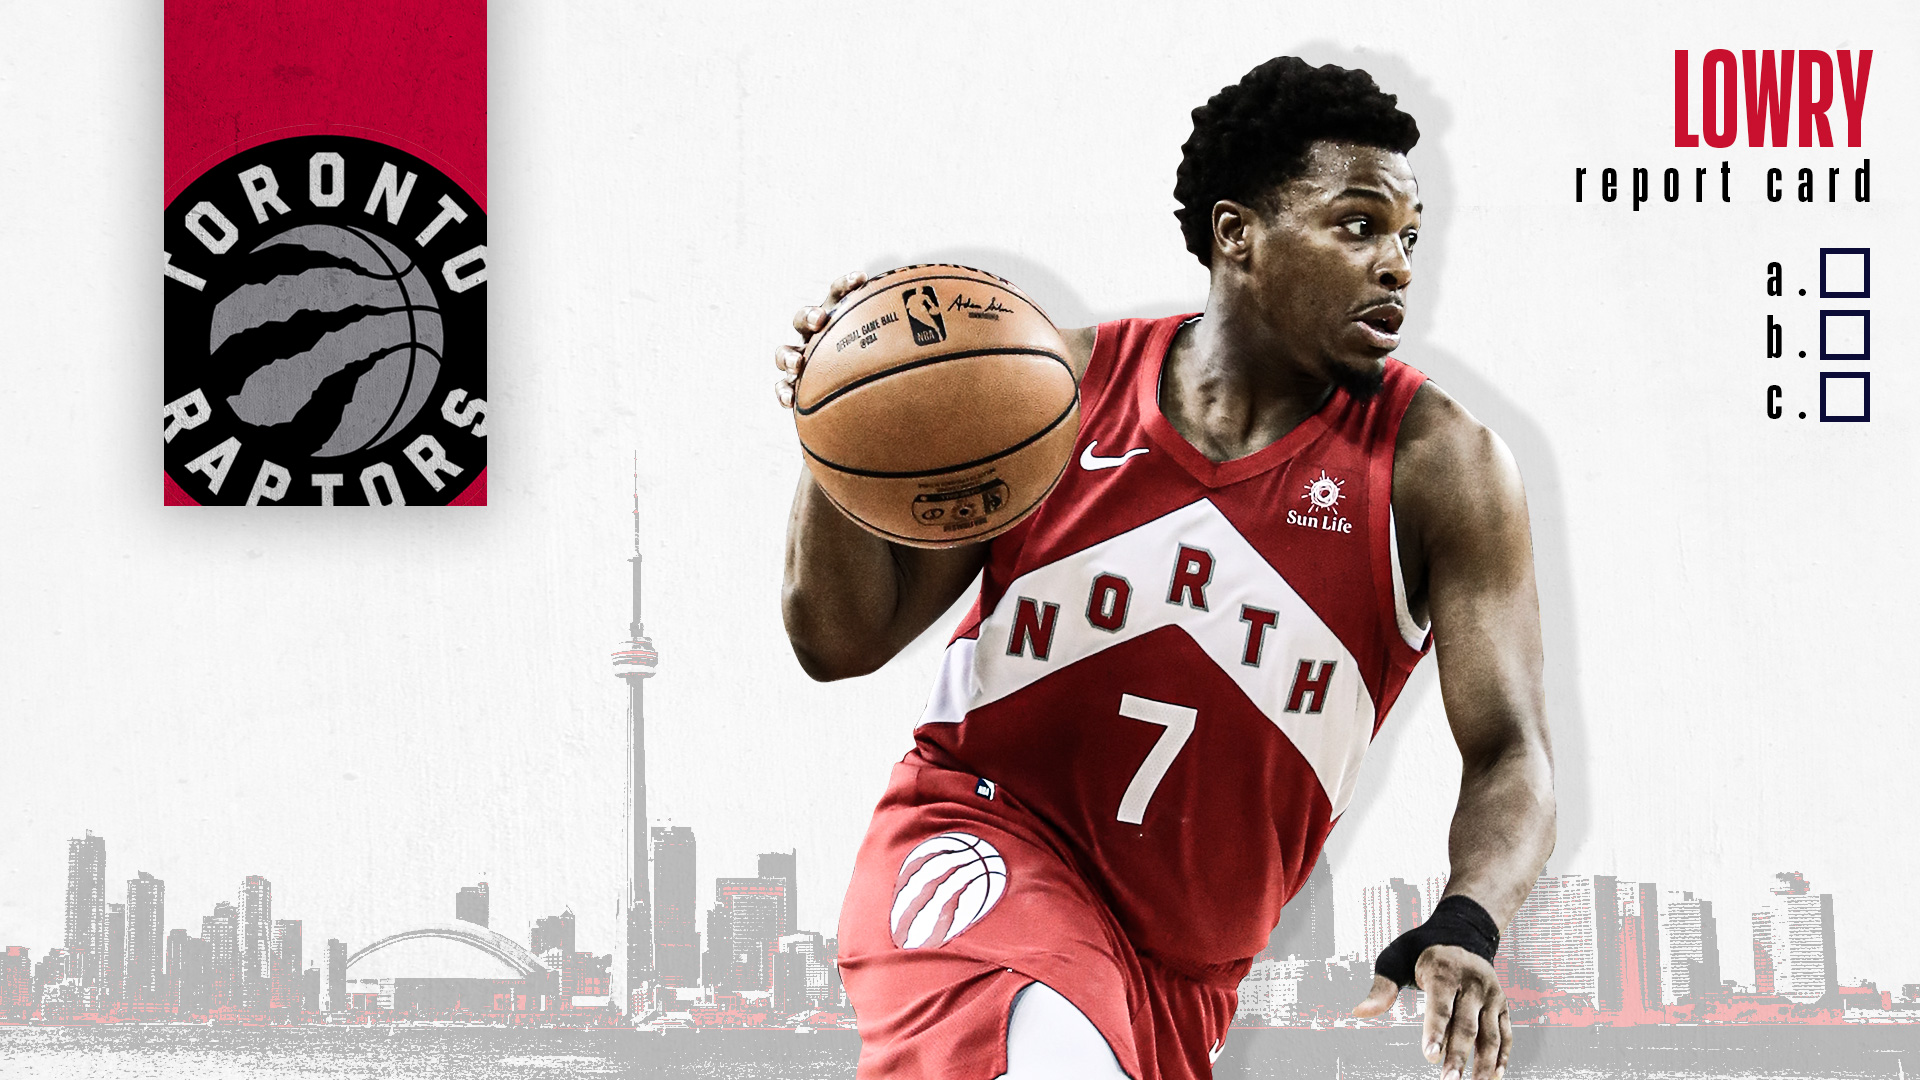 kyle lowry wallpaper, basketball player, player, sportswear, jersey, team sport, basketball, competition event, tournament, font, sports